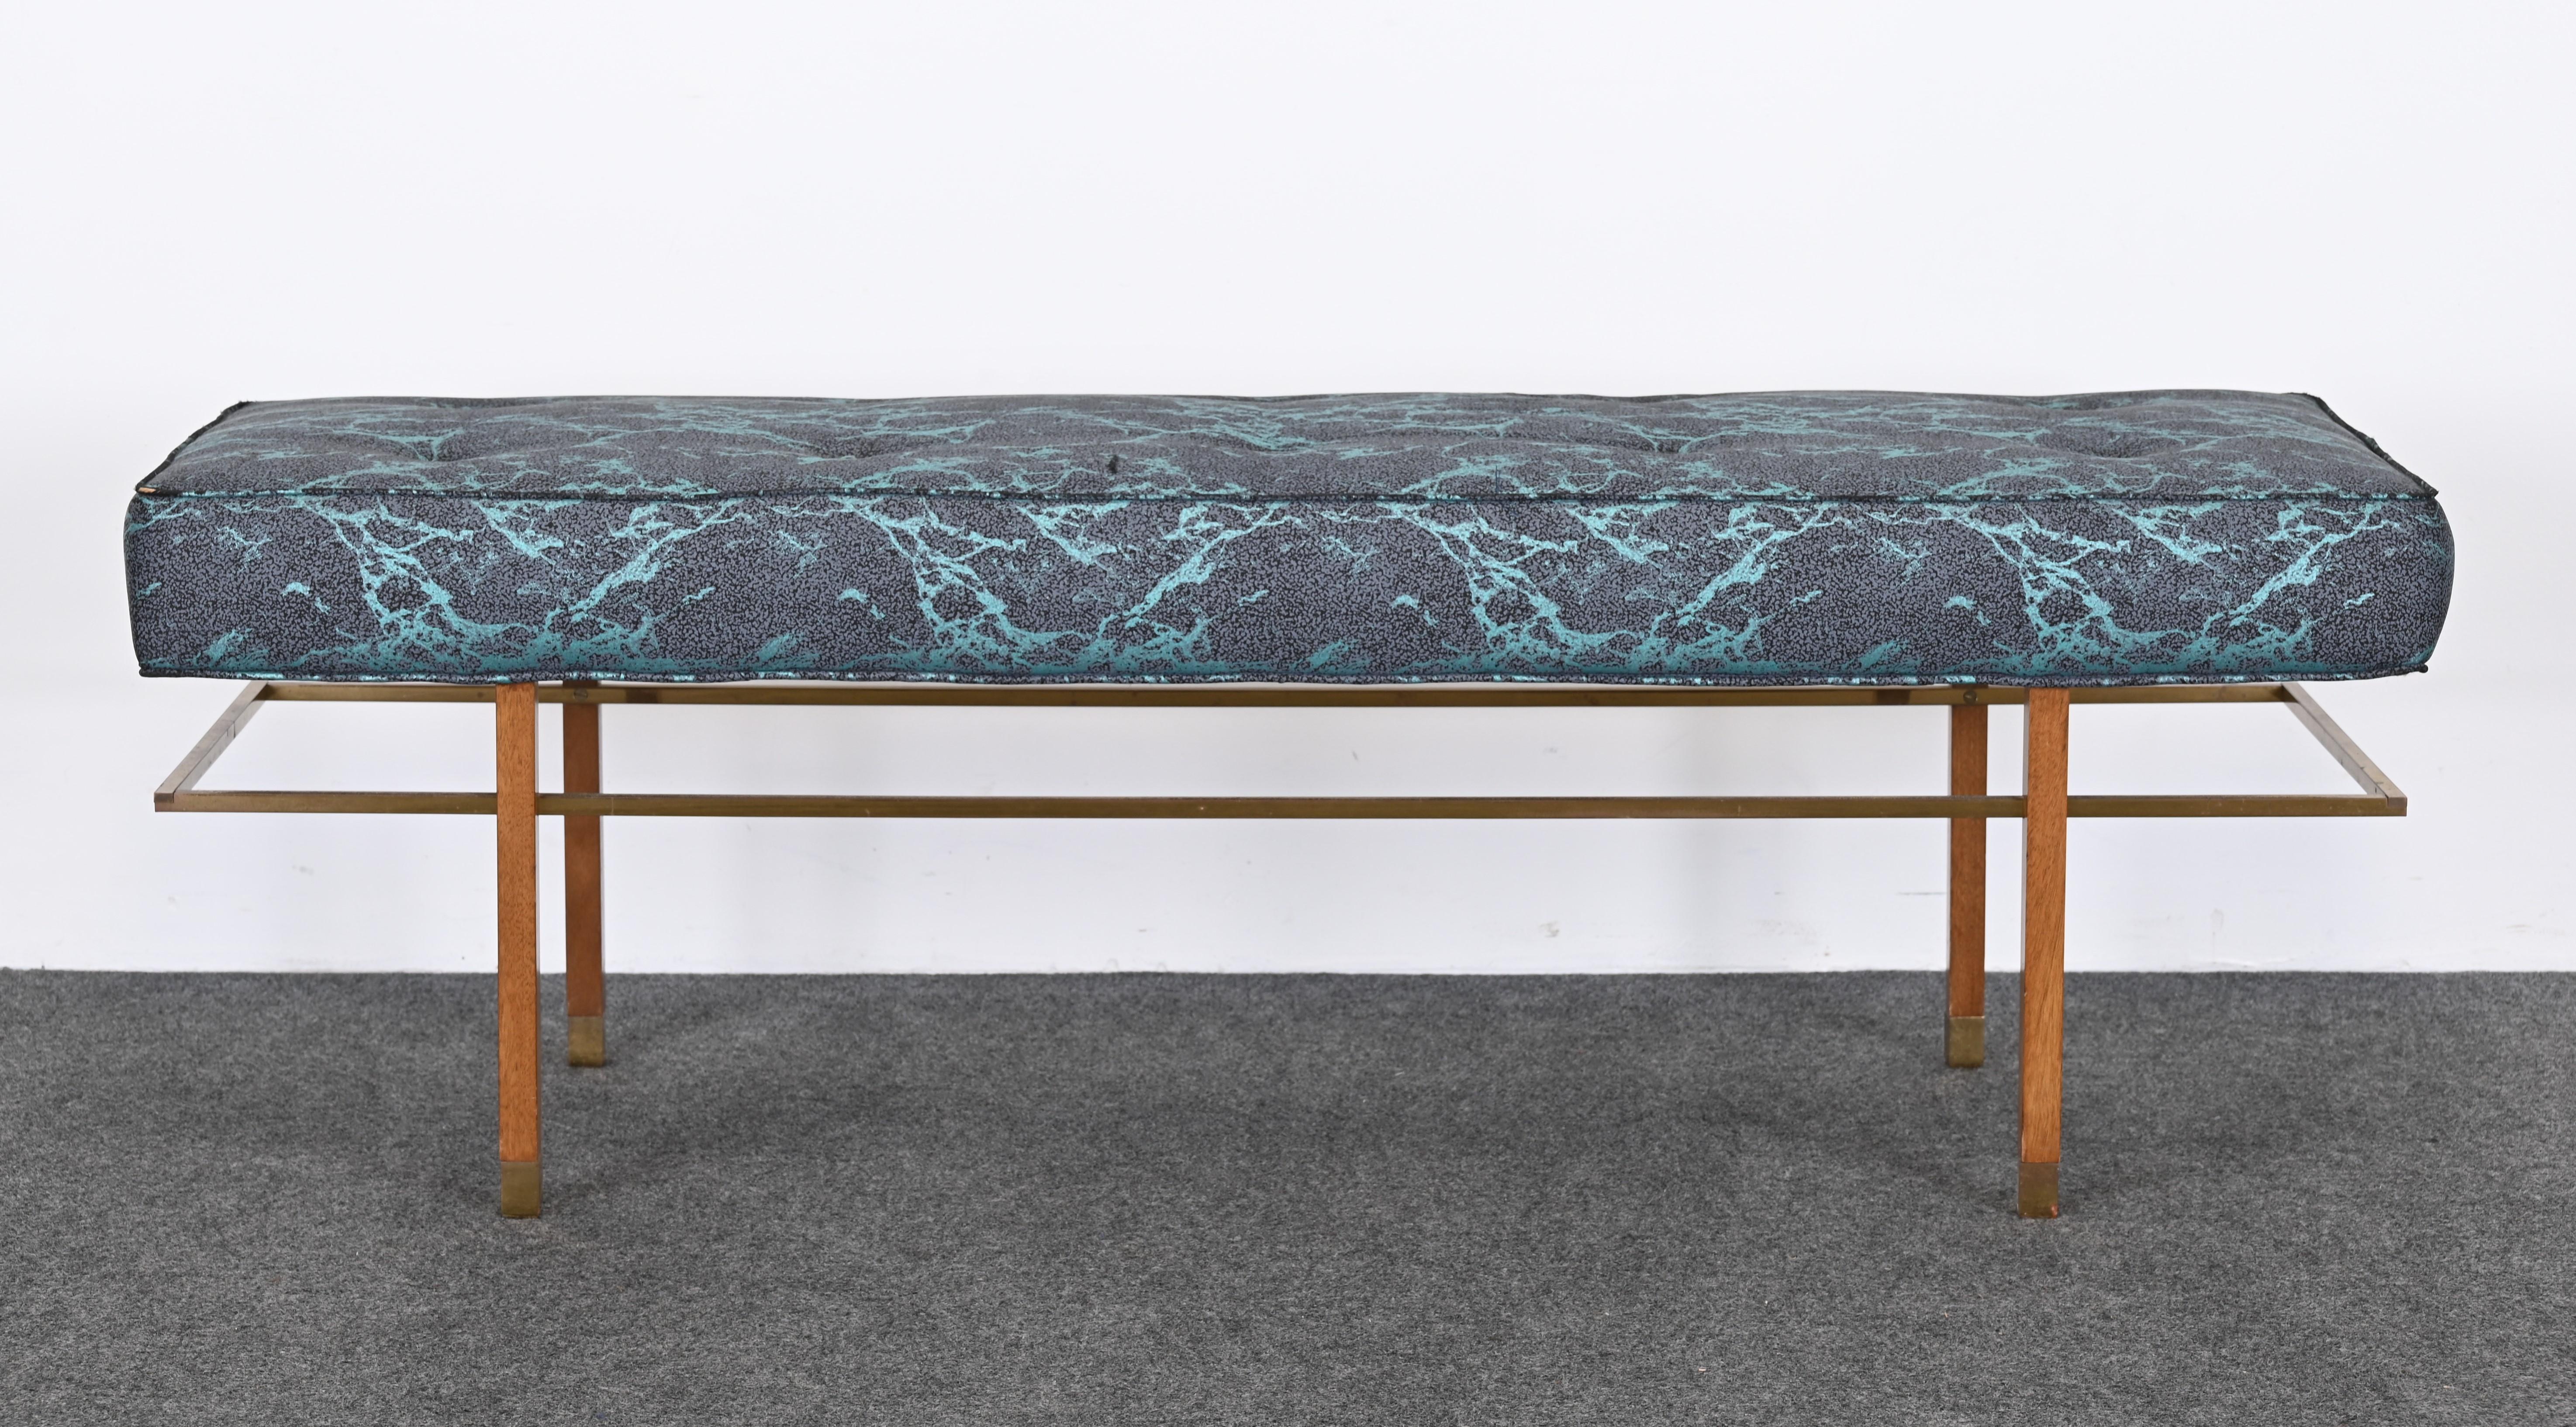 A minimalist designer bench by Harvey Probber, 1955. This modern bench has brass accents and mahogany legs. The solid brass accents can be polished but are presently patinated and in vintage condition. The upholstery is also vintage, new upholstery